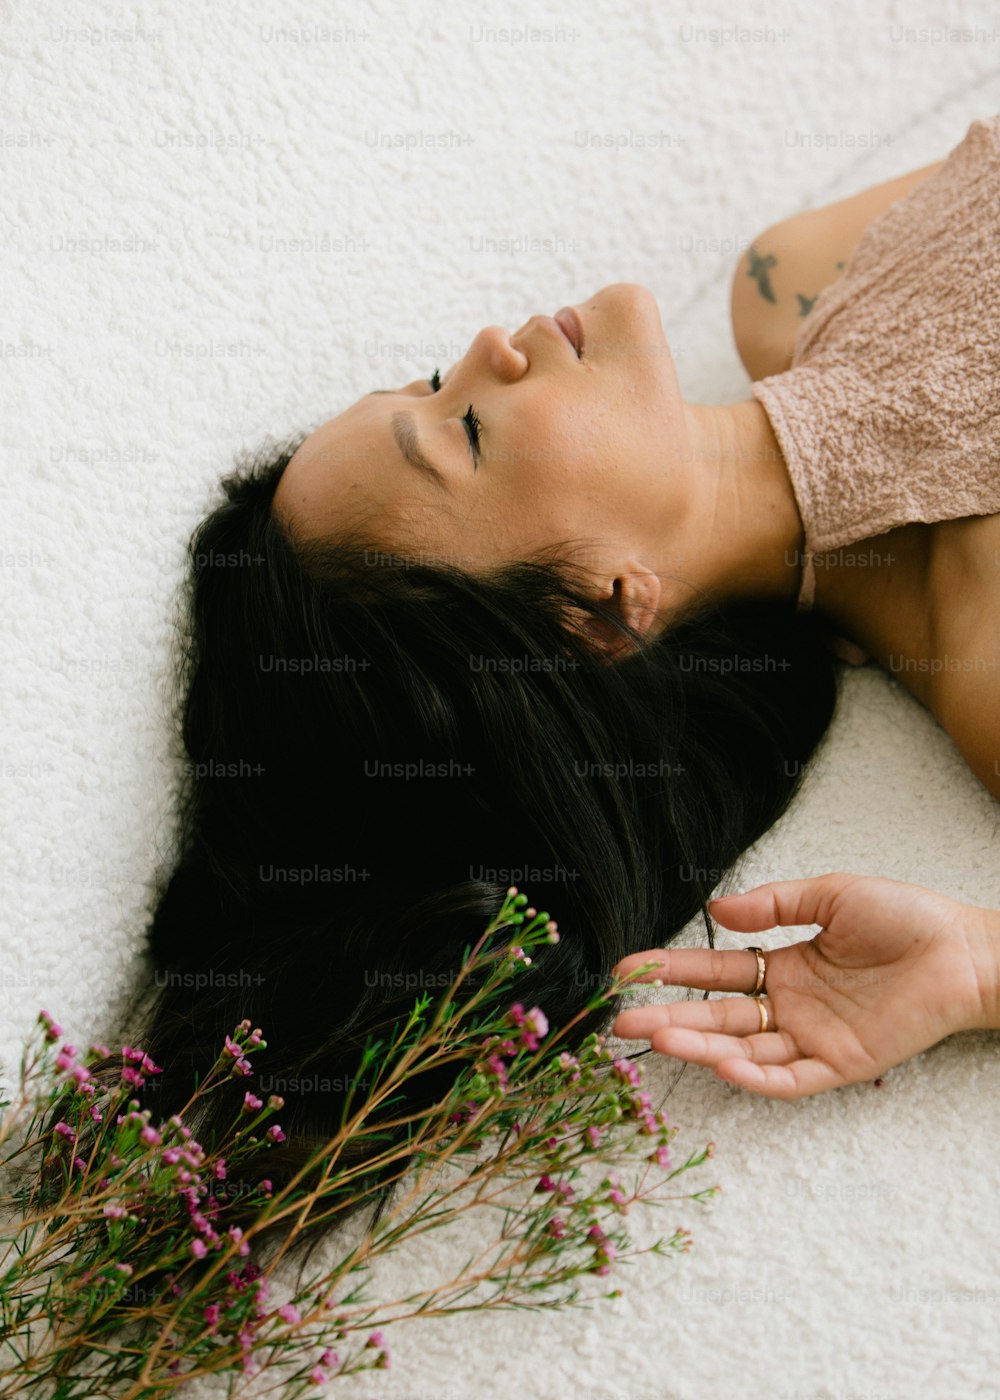 a woman laying on the floor next to a bunch of flowers